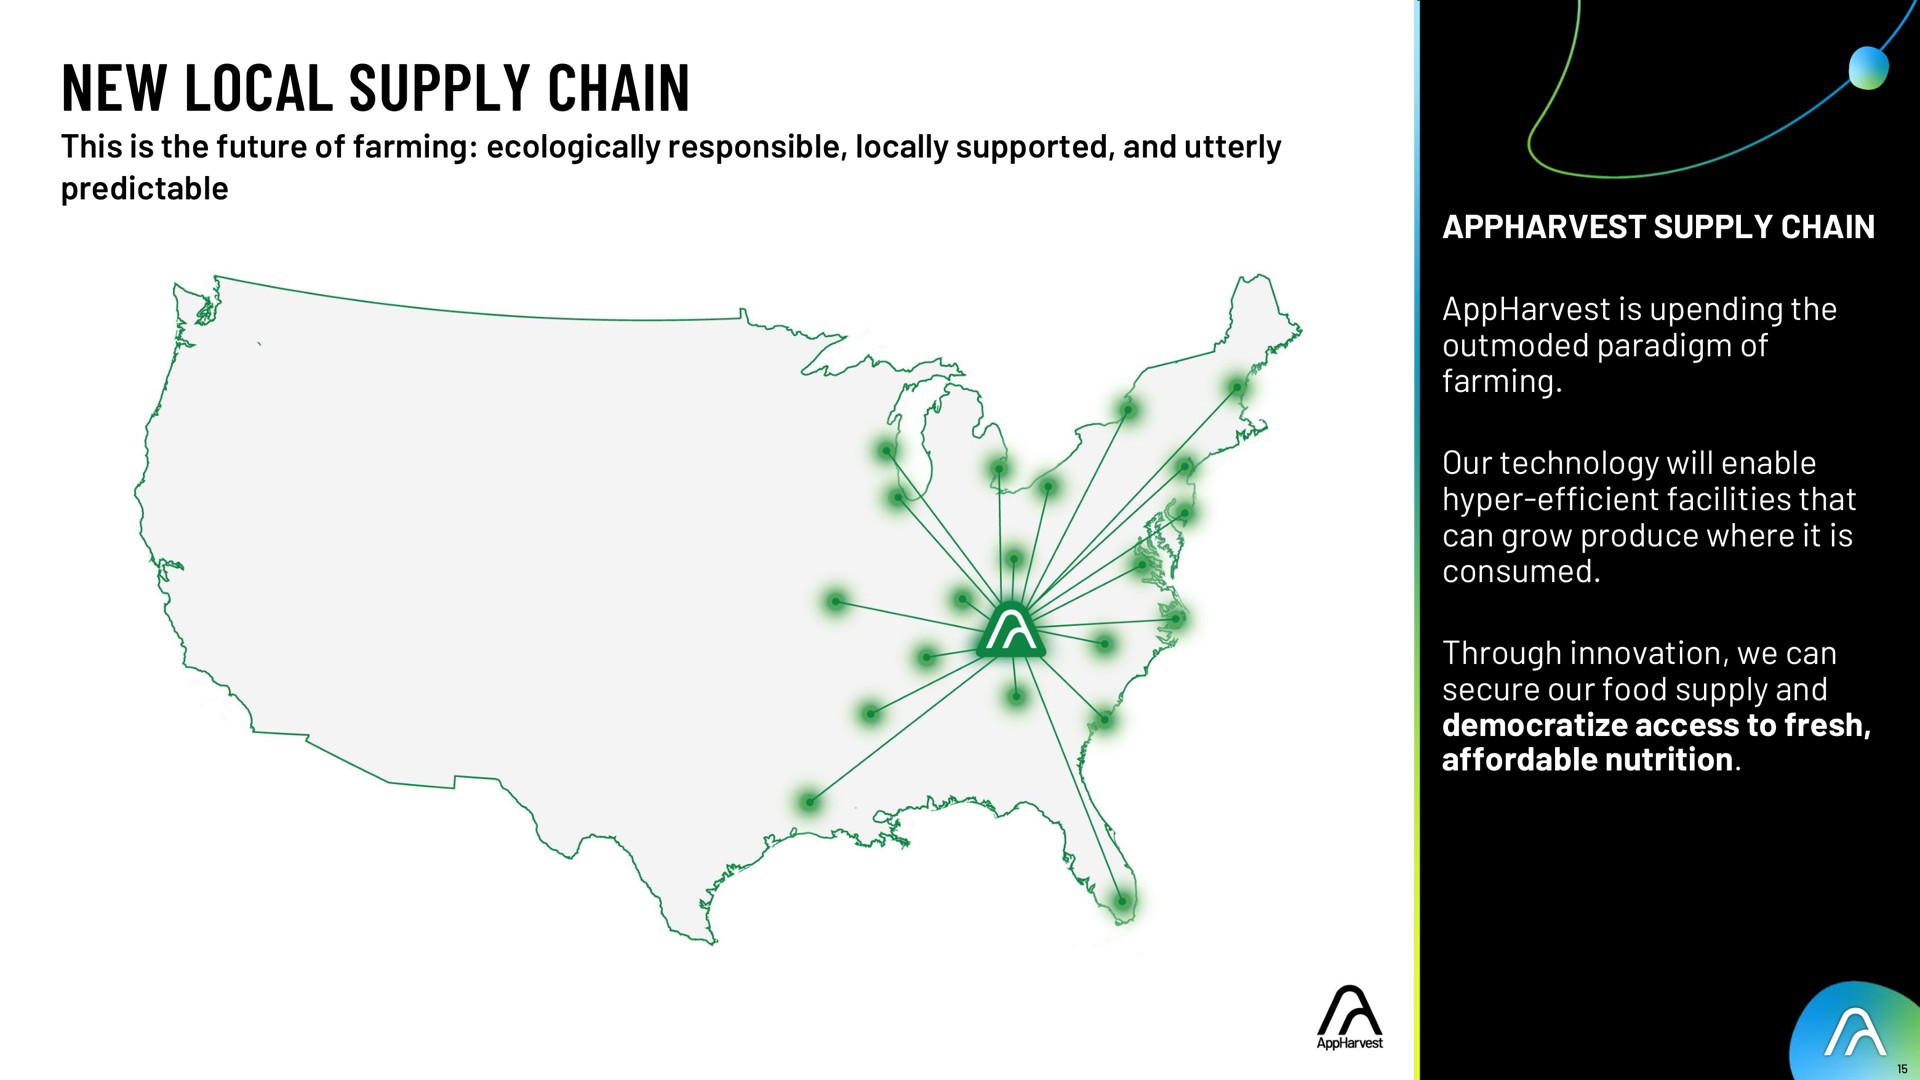 new local supply chain | AppHarvest